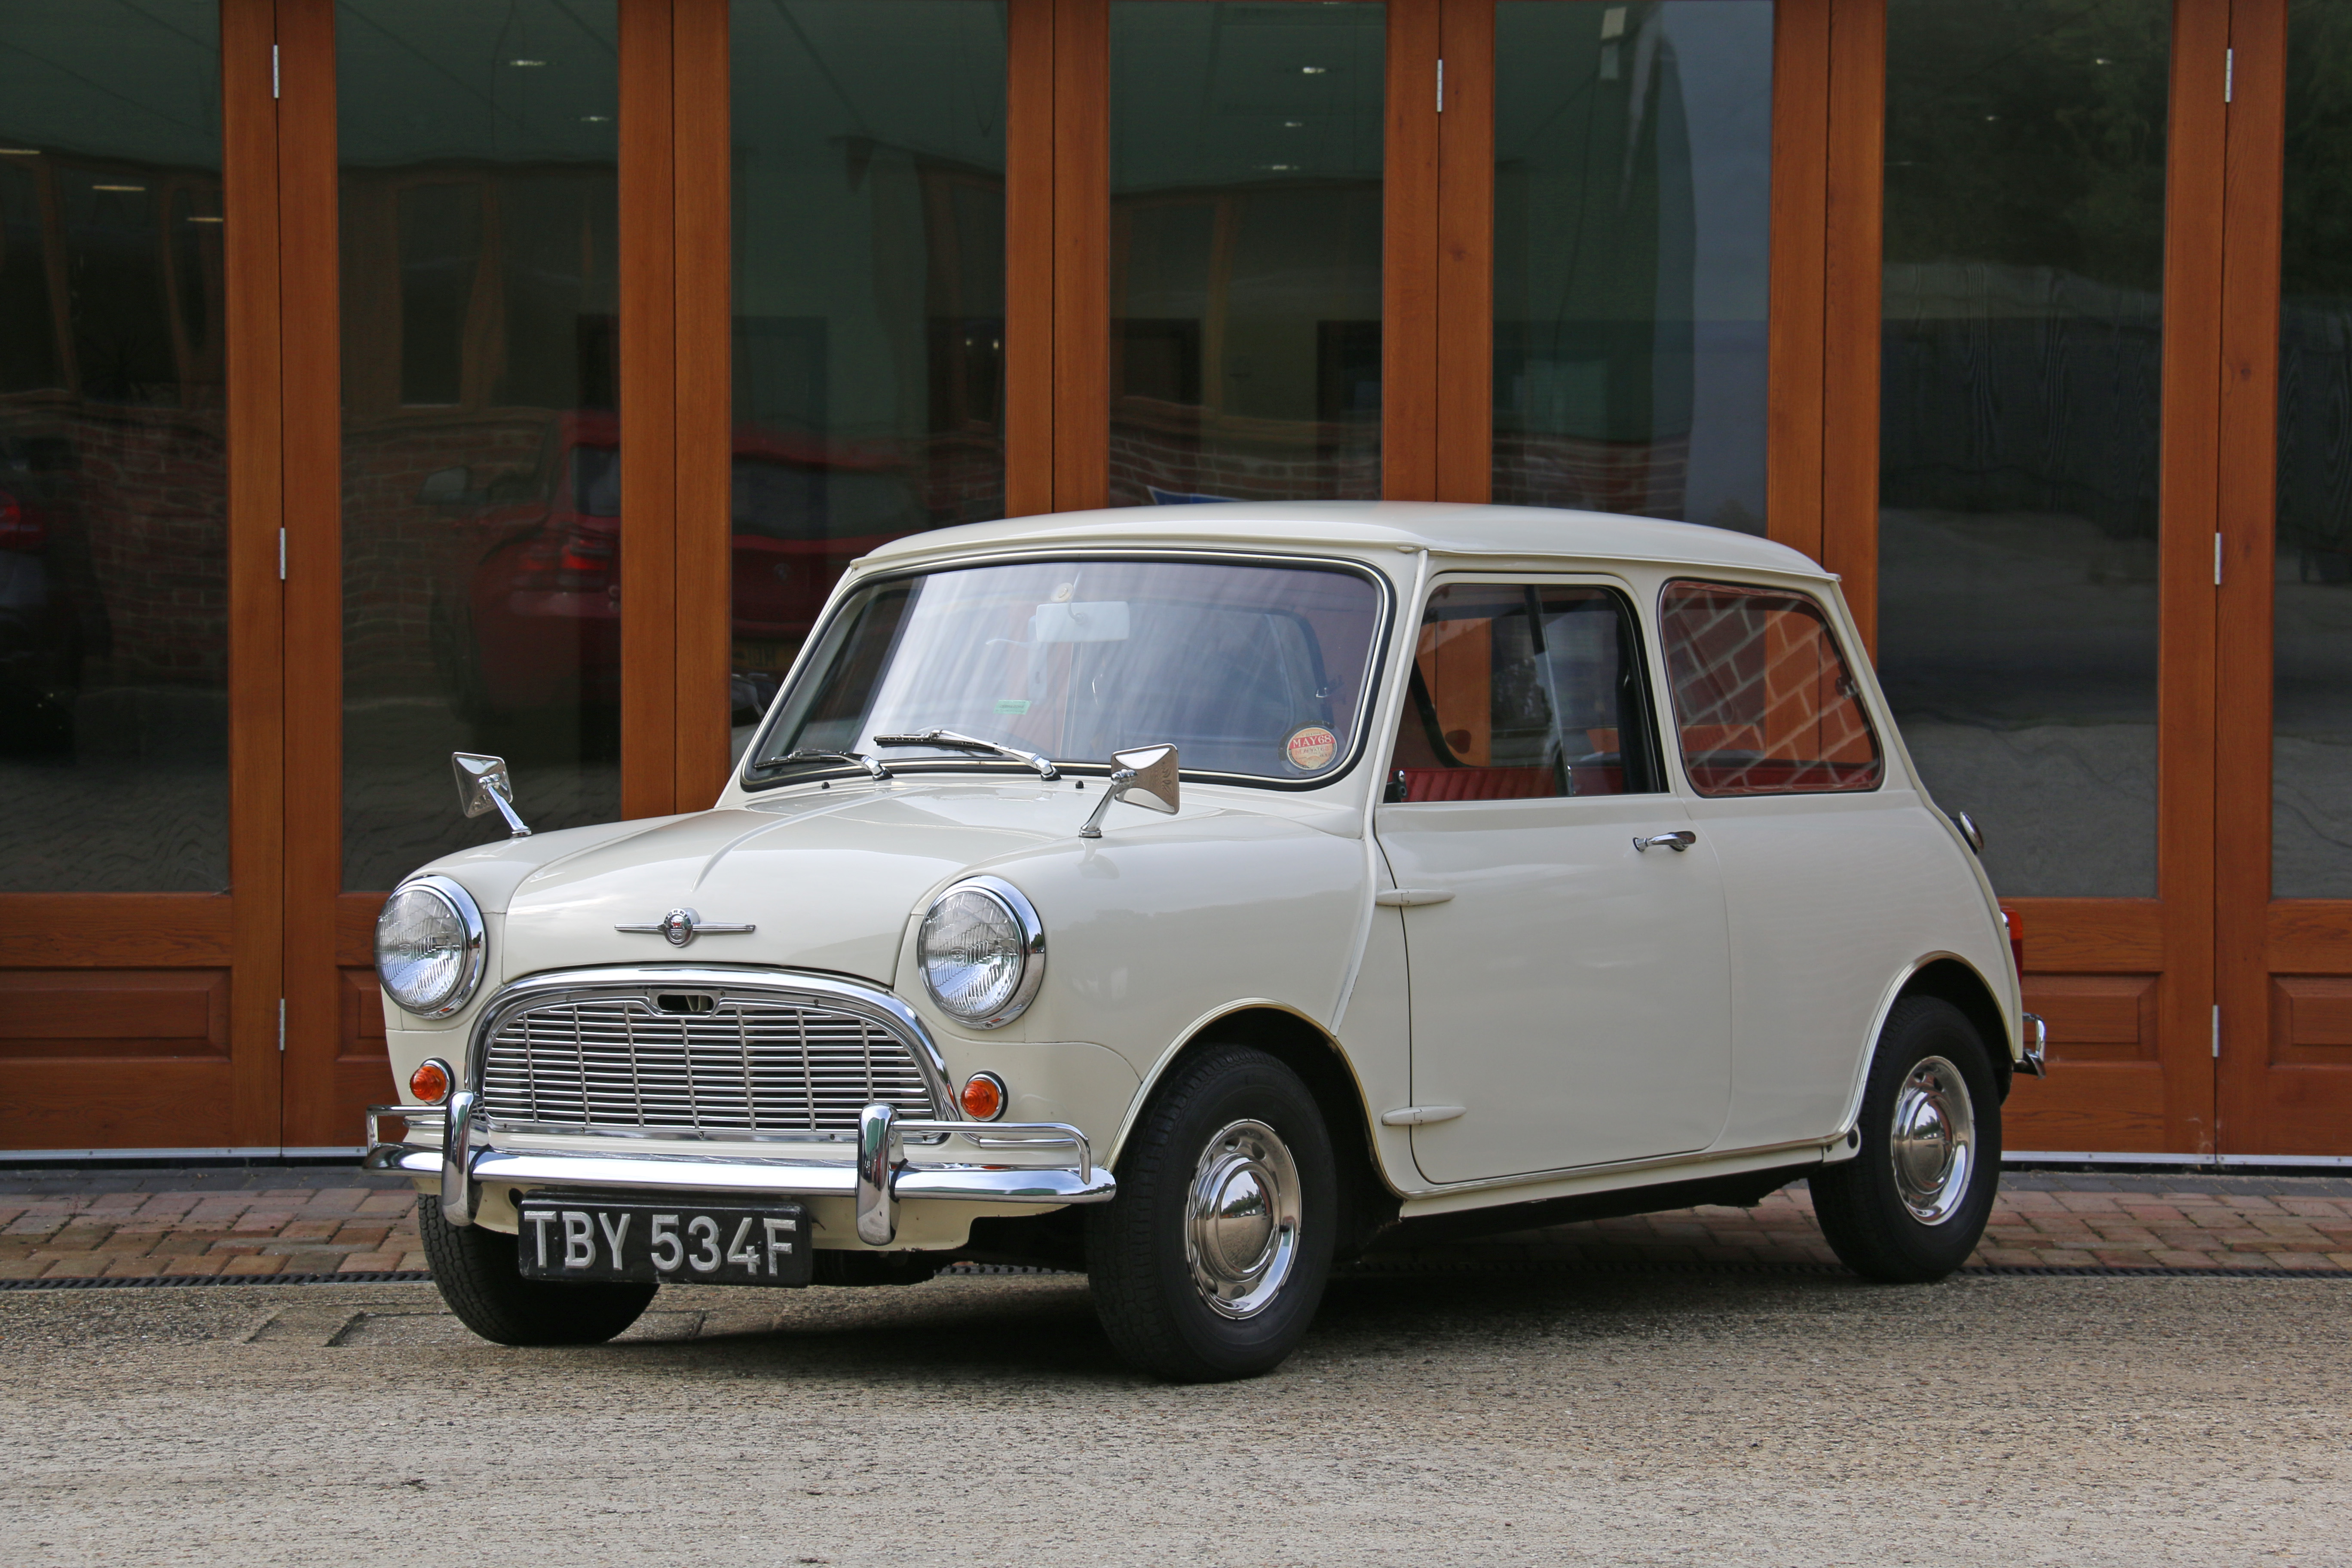 The Mini was a masterclass in small car packaging